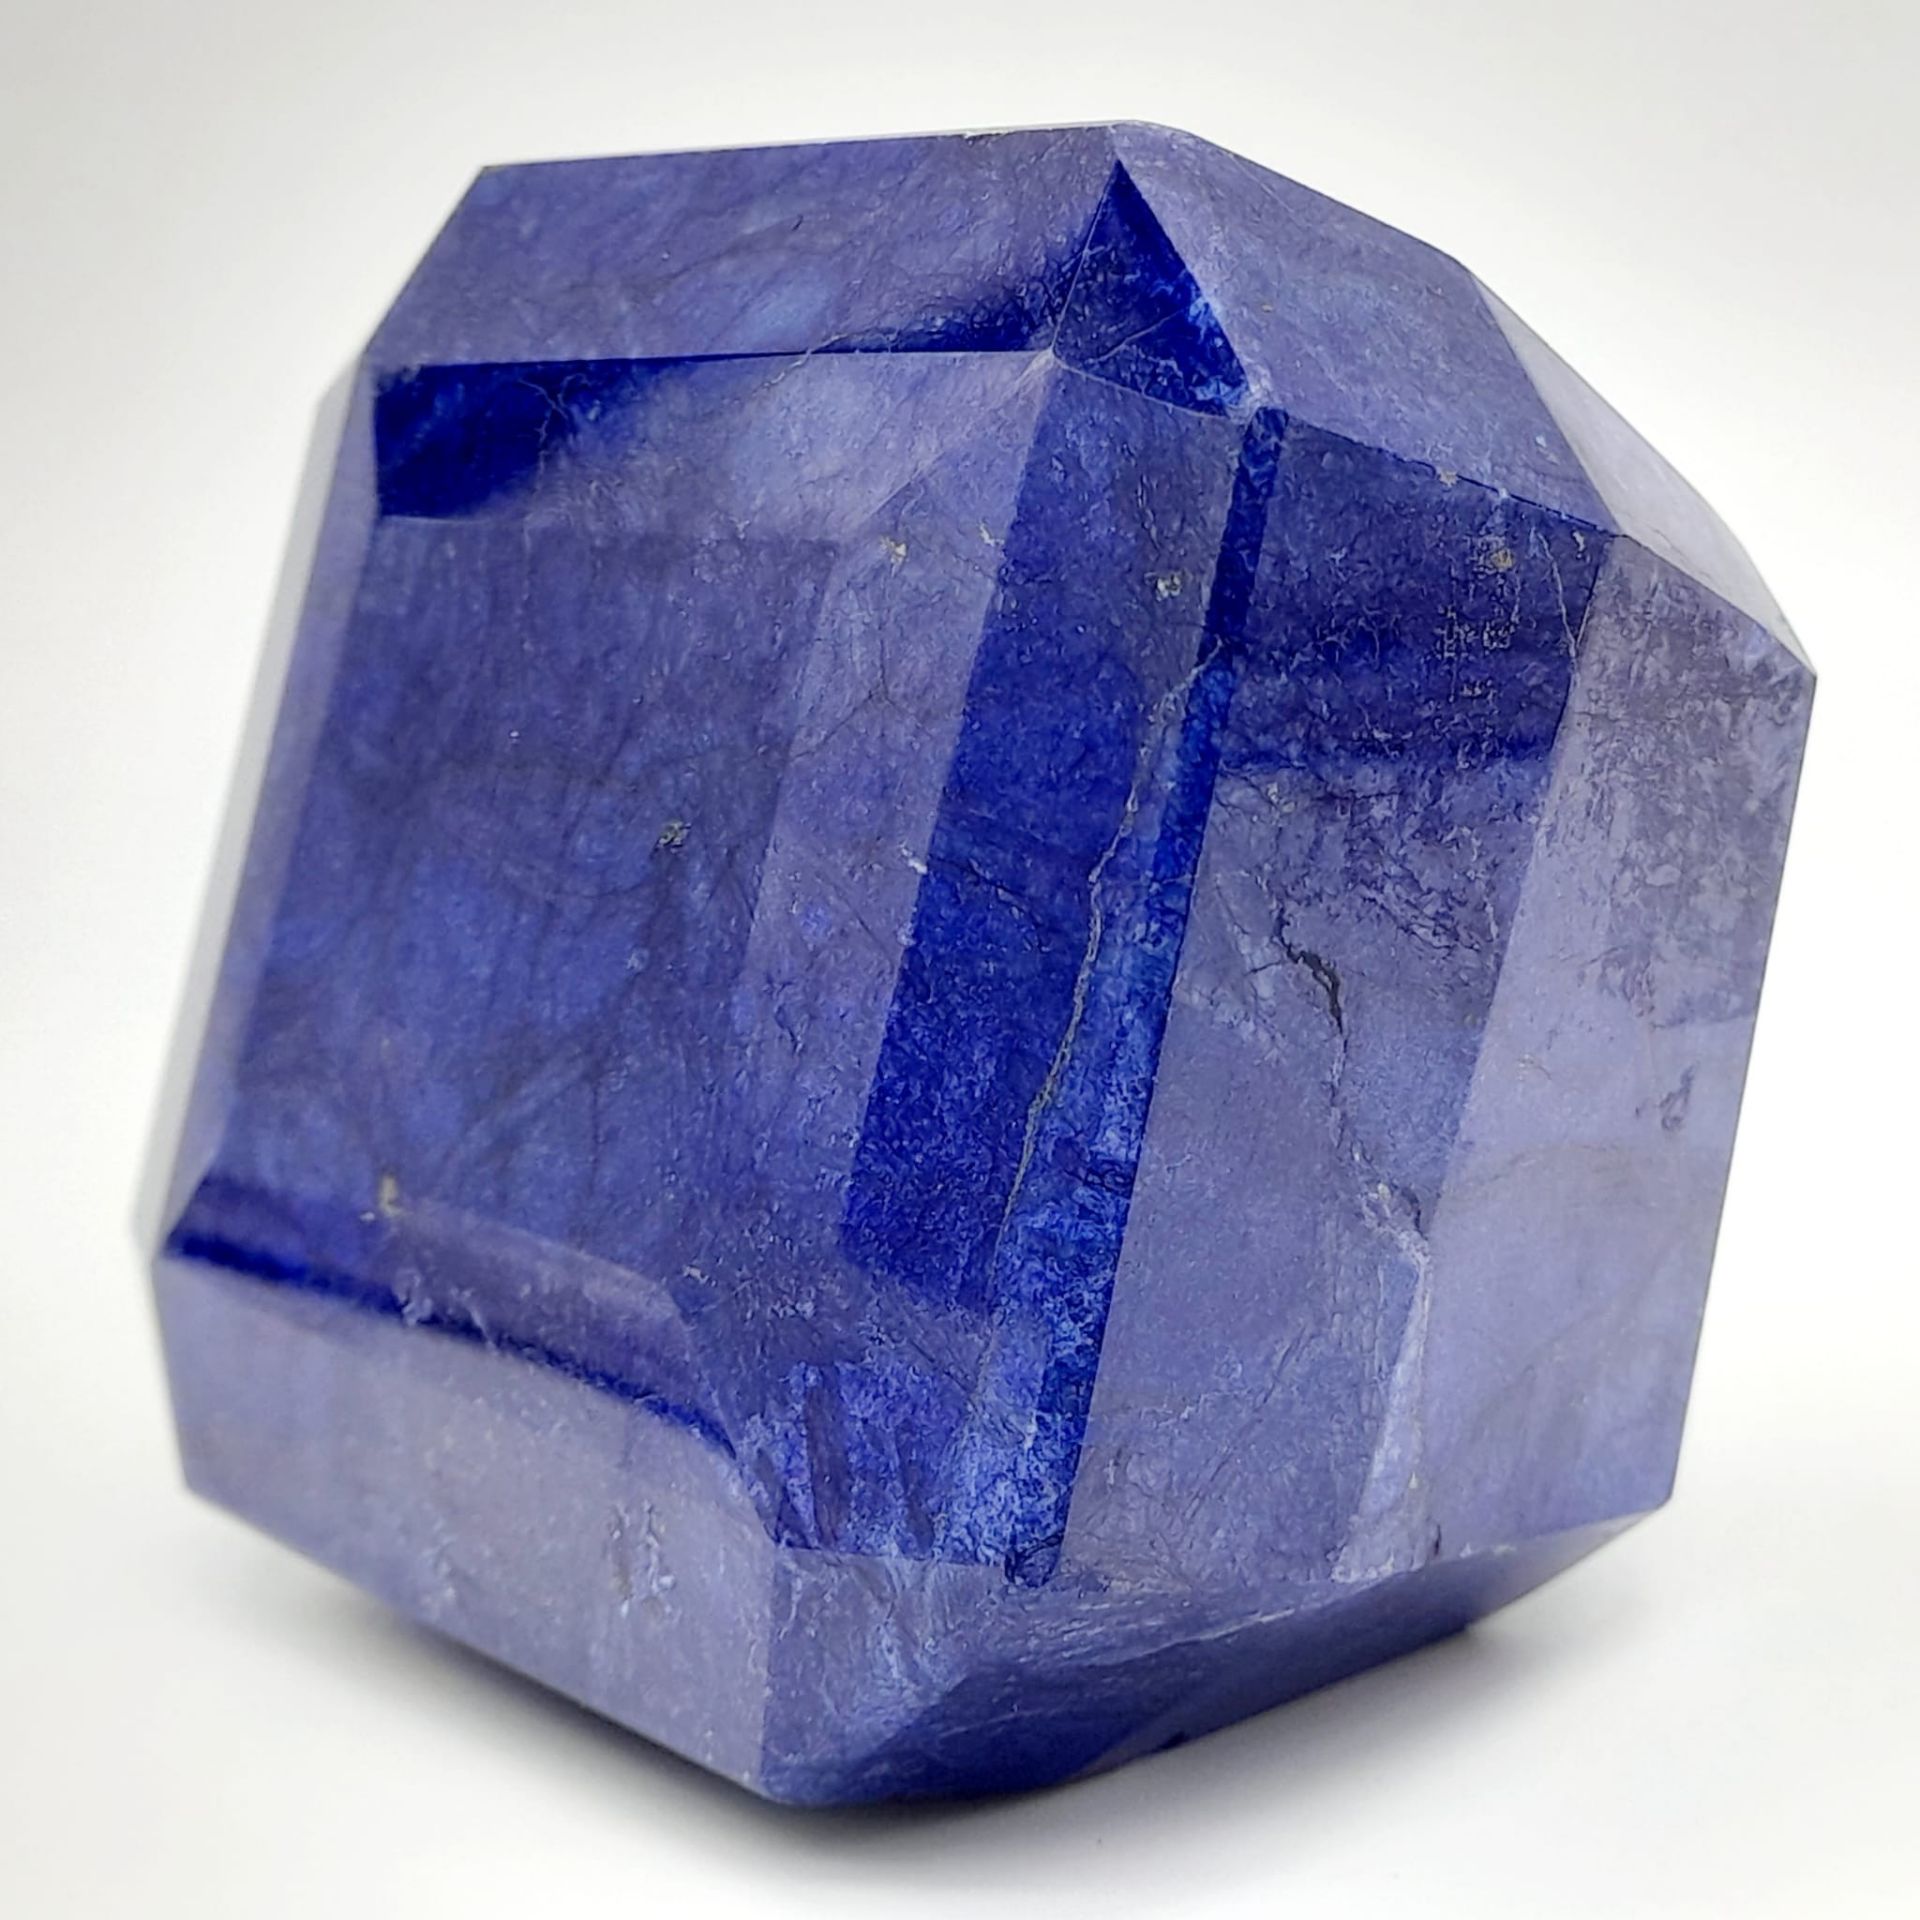 A 4230ct Rare Natural Blue Sapphire, Octagonal Shape. Comes Complete with GLI Certificate. - Image 6 of 8